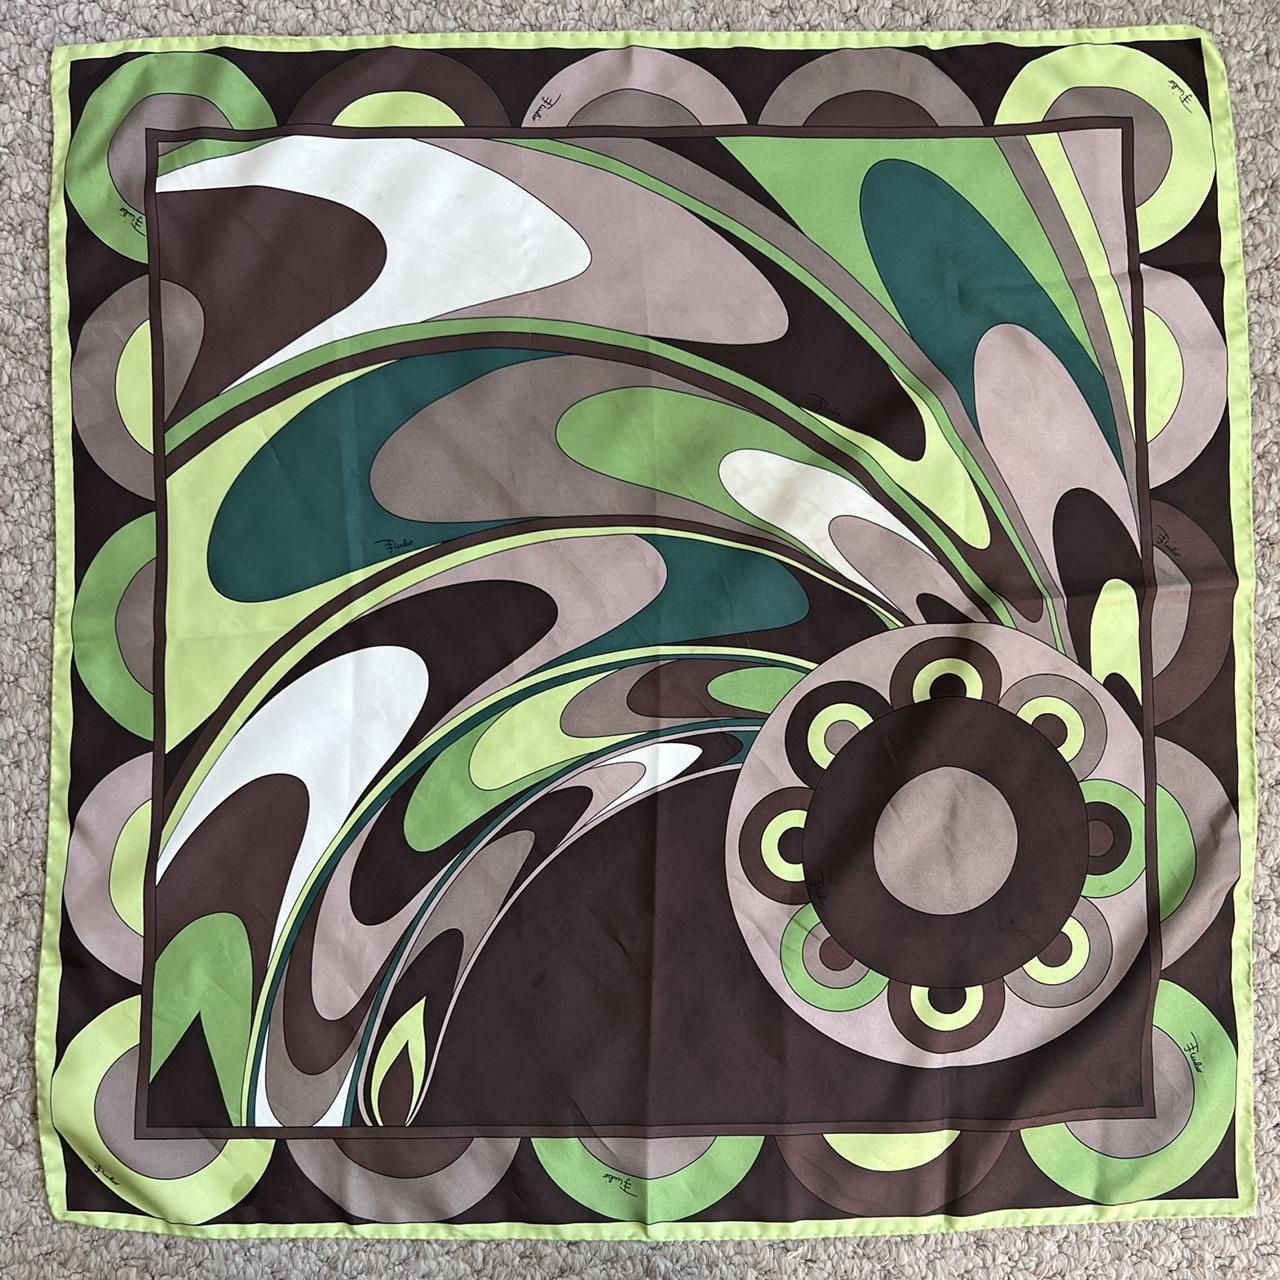 Emilio Pucci Women's Green and Brown Scarf-wraps